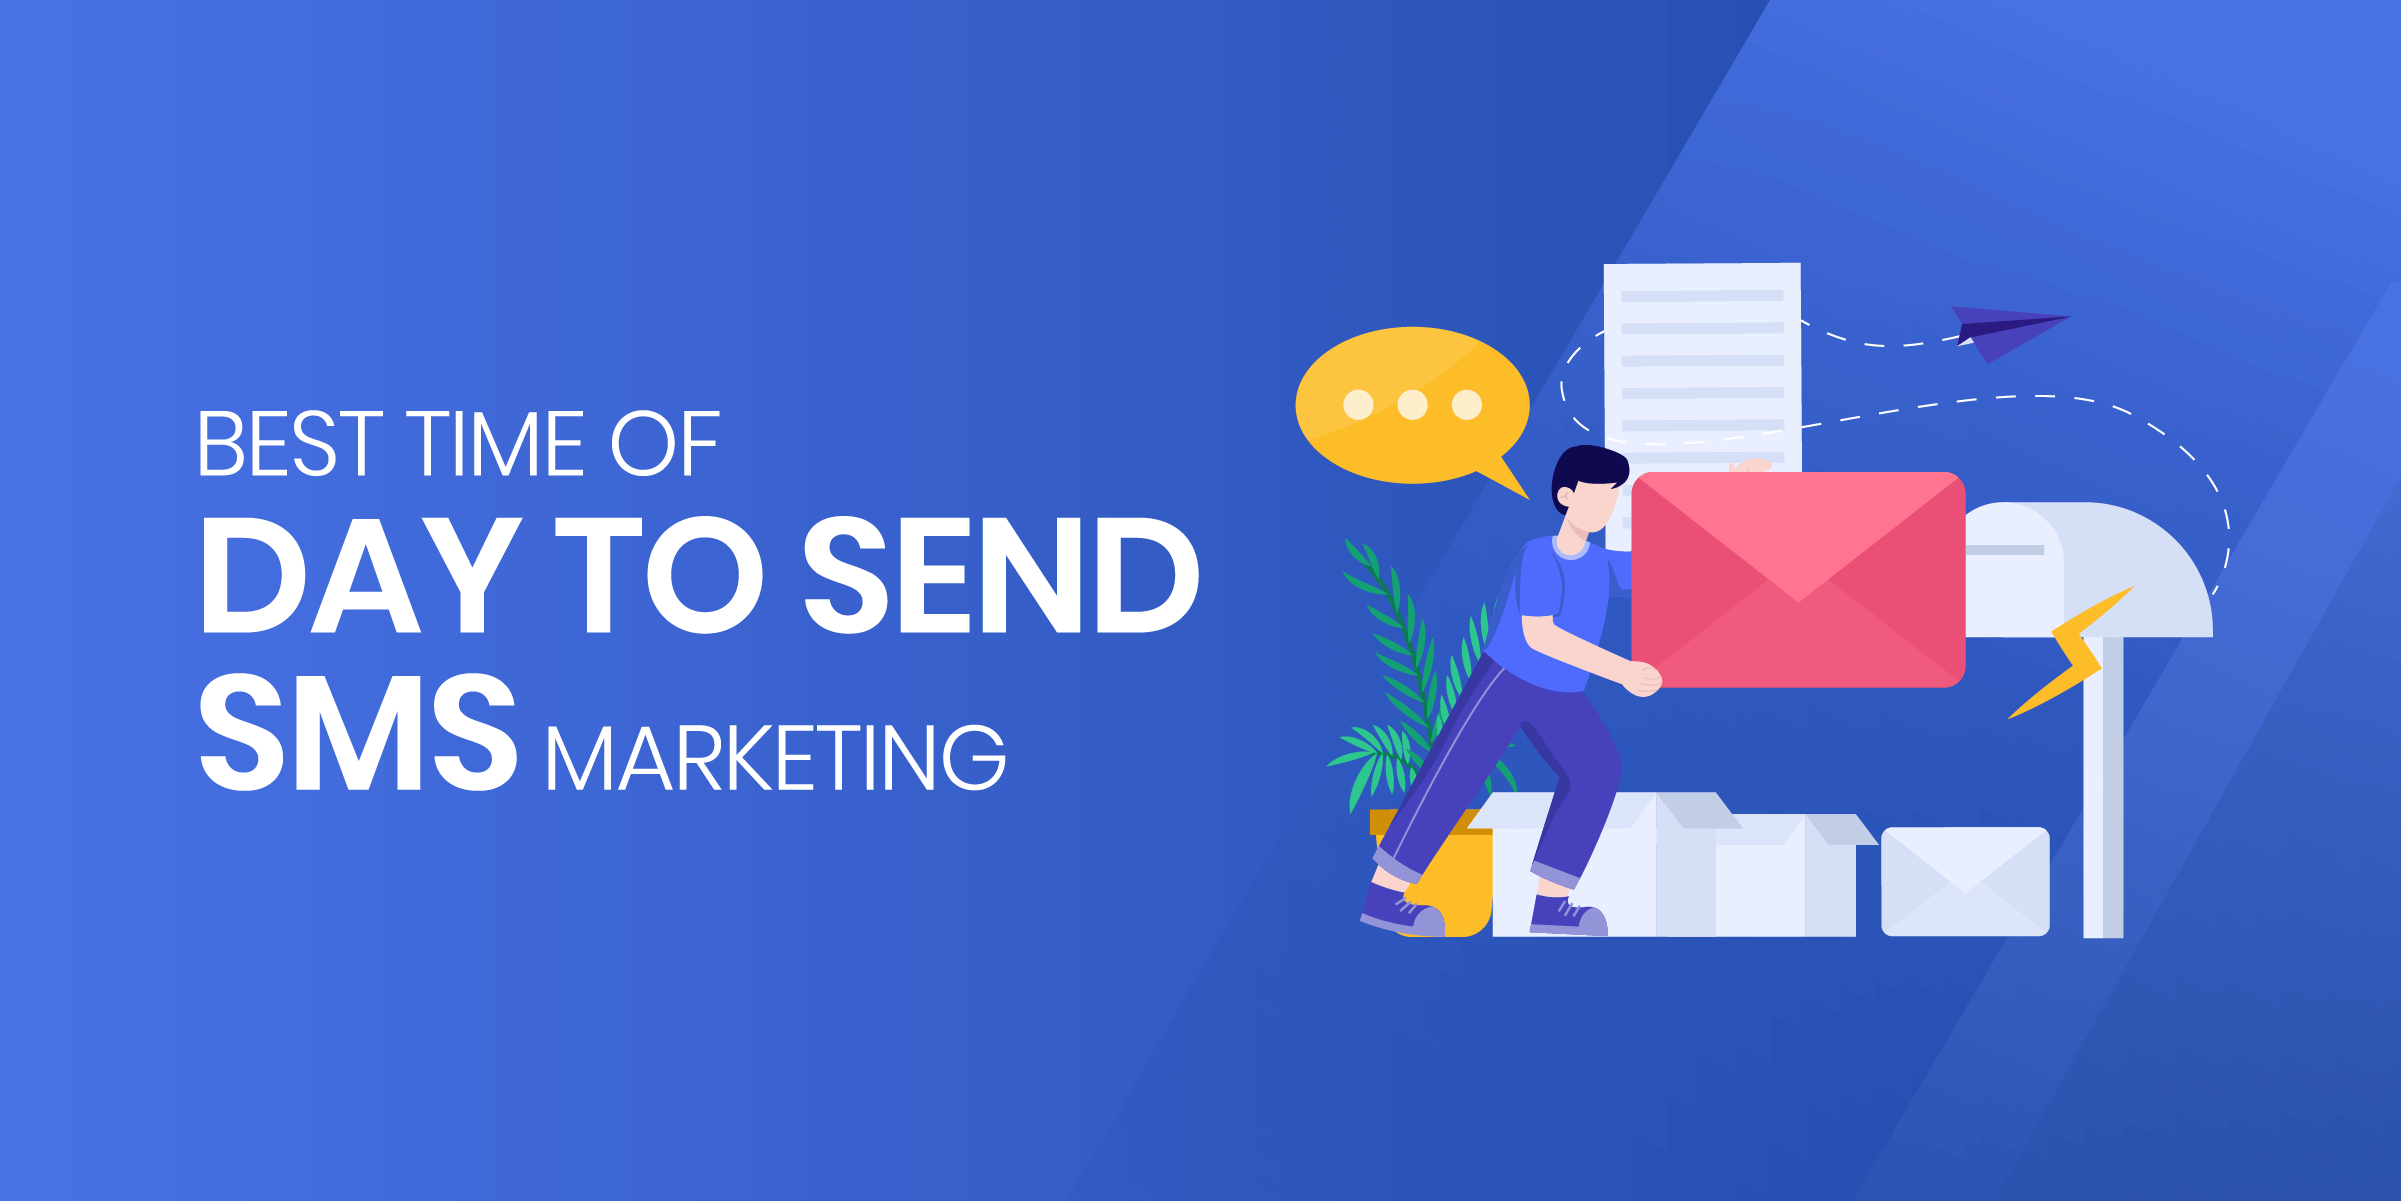 Best Time of Day to Send SMS Marketing